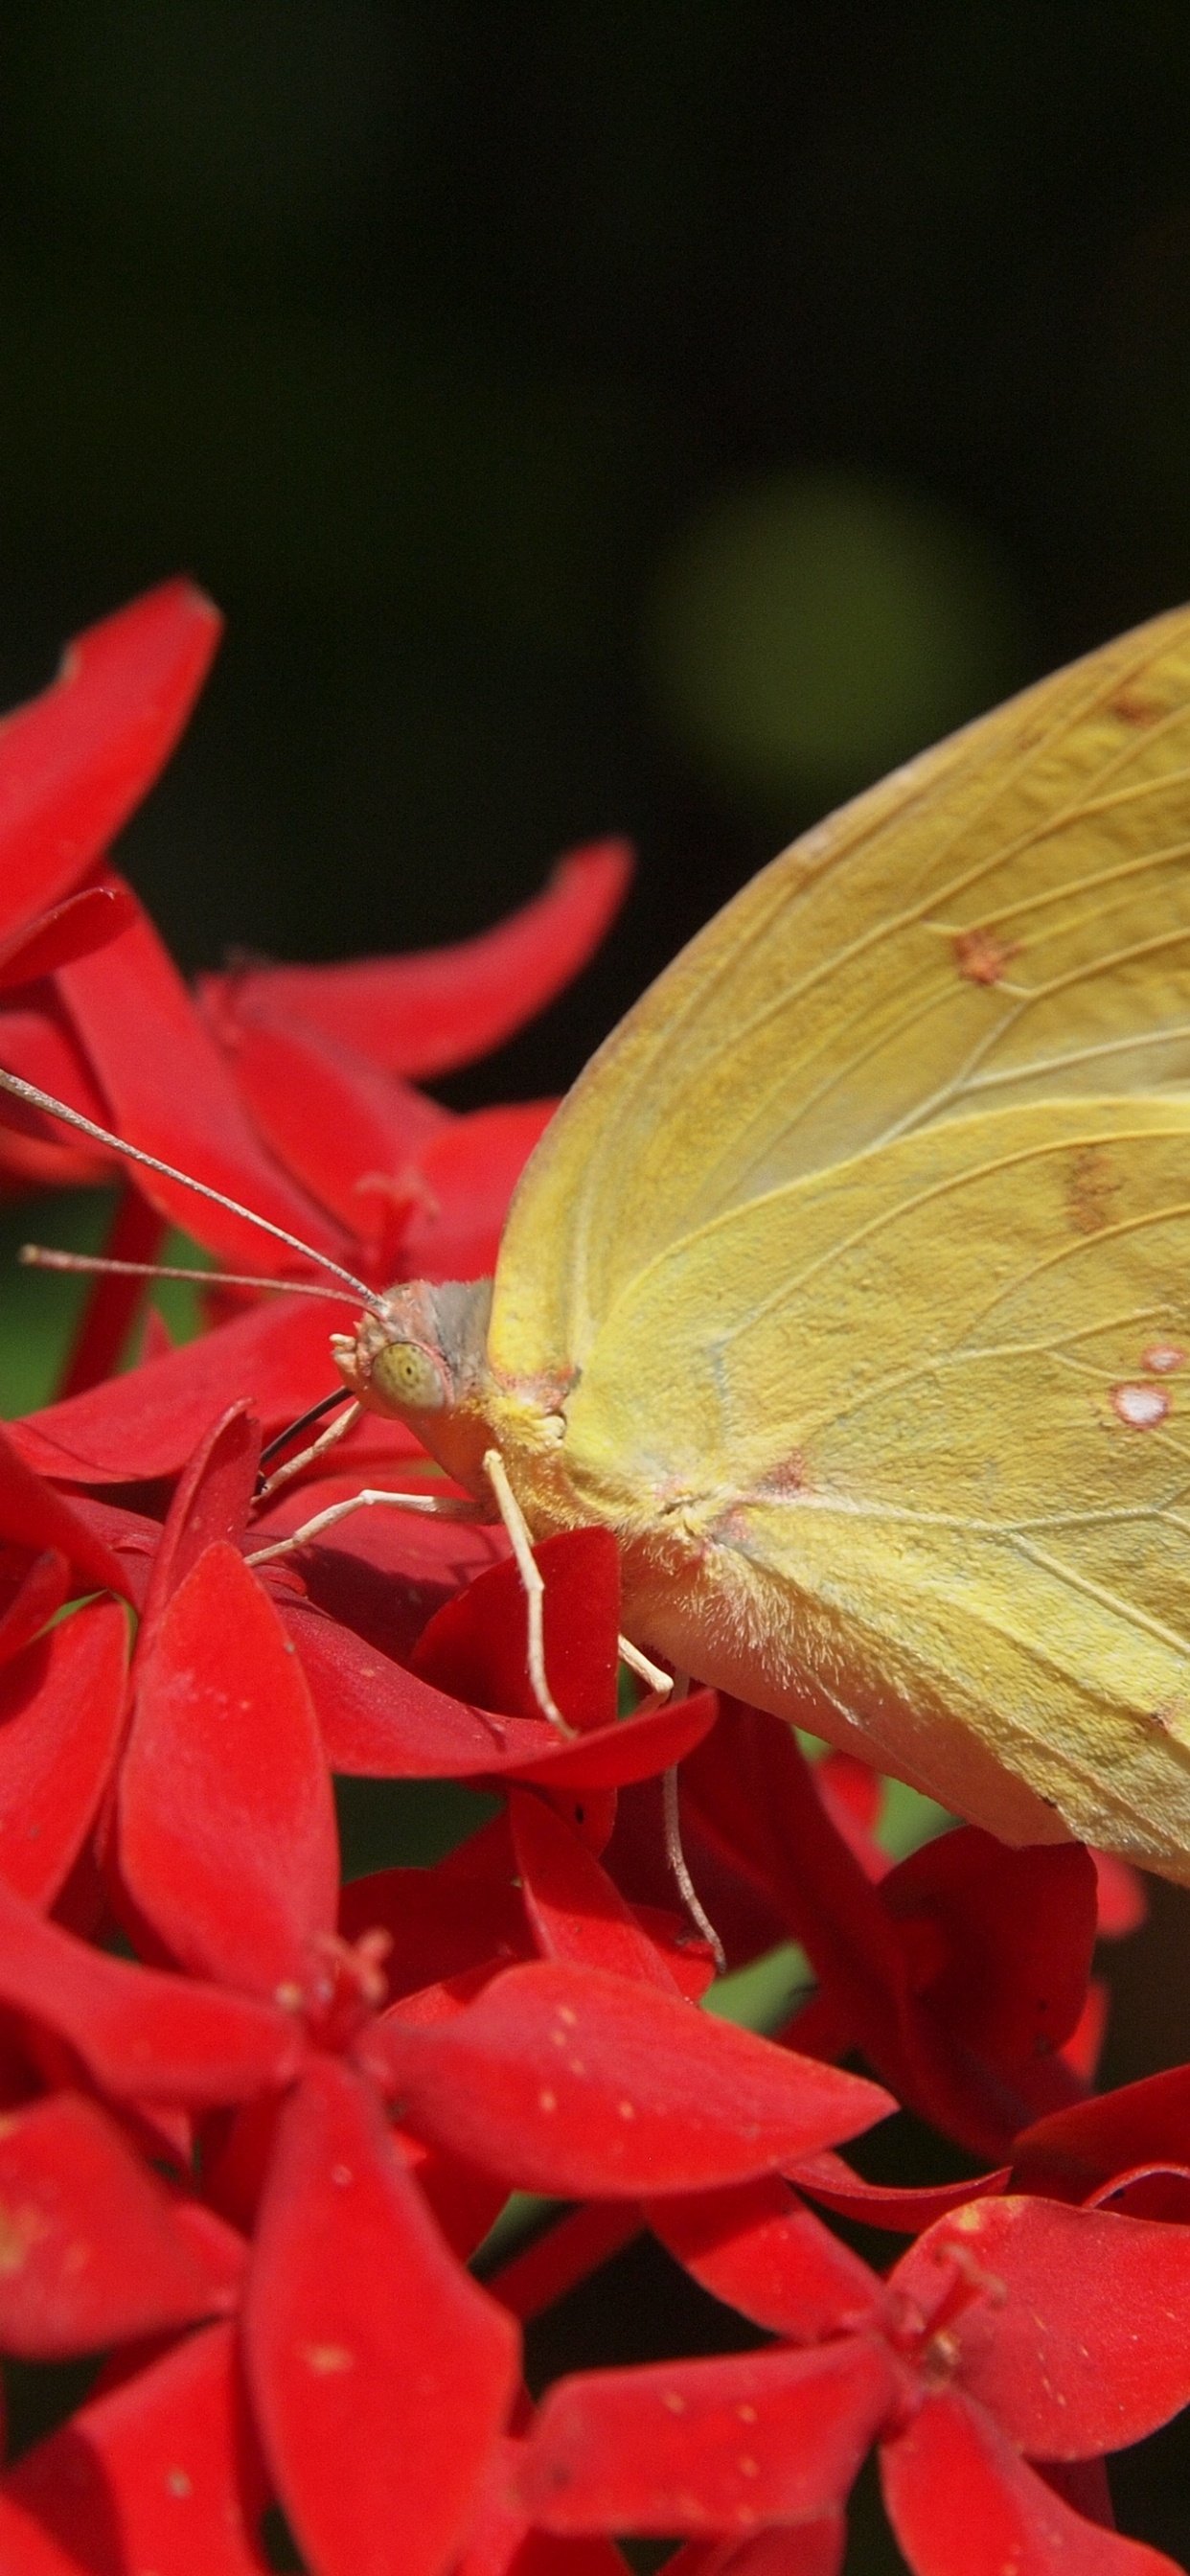 Yellow Butterfly Perched on Red Flower in Close up Photography During Daytime. Wallpaper in 1242x2688 Resolution